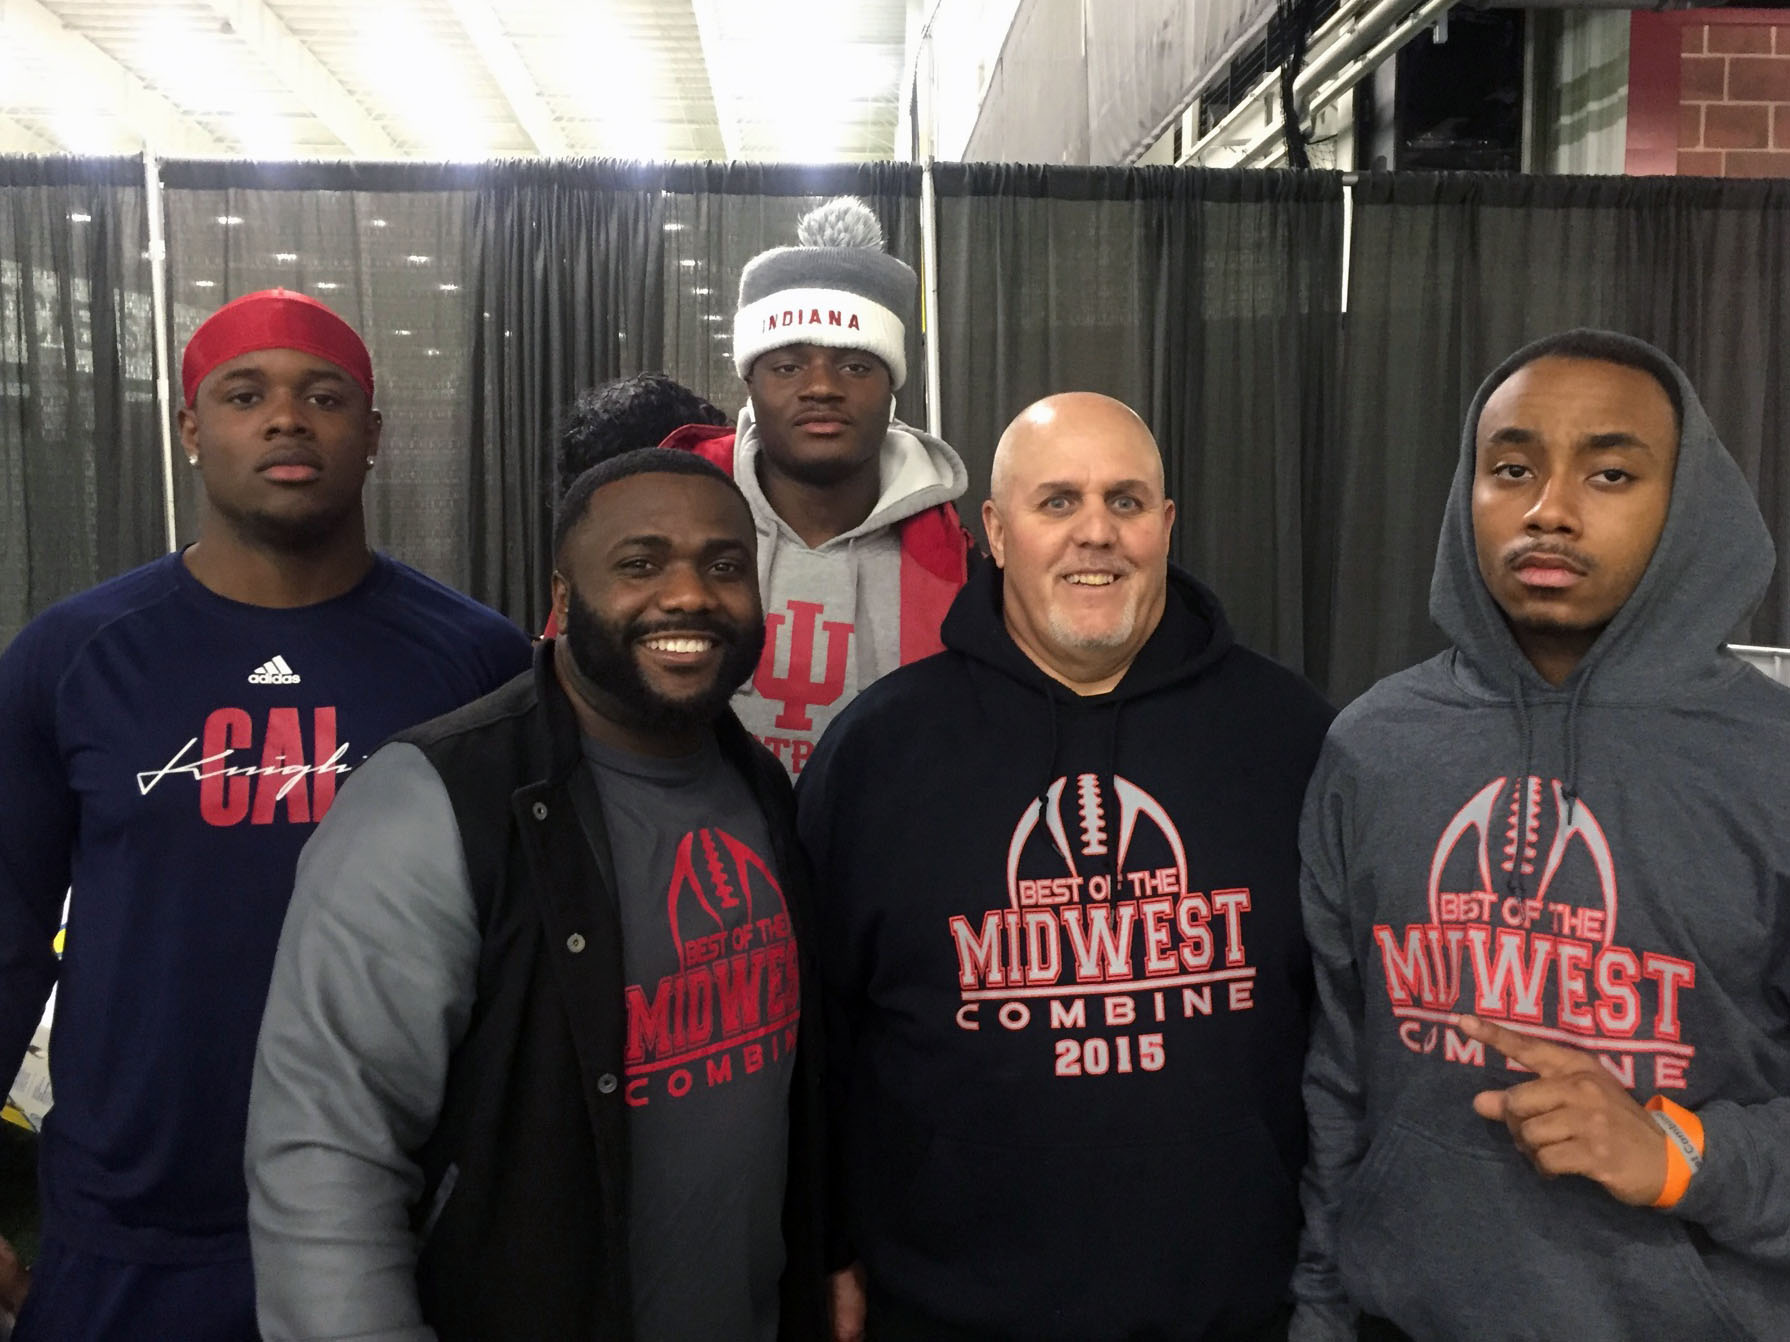 Jean Guillaume pictured with former players and Greg Brookey who runs the Midwest Combine in Indiana.